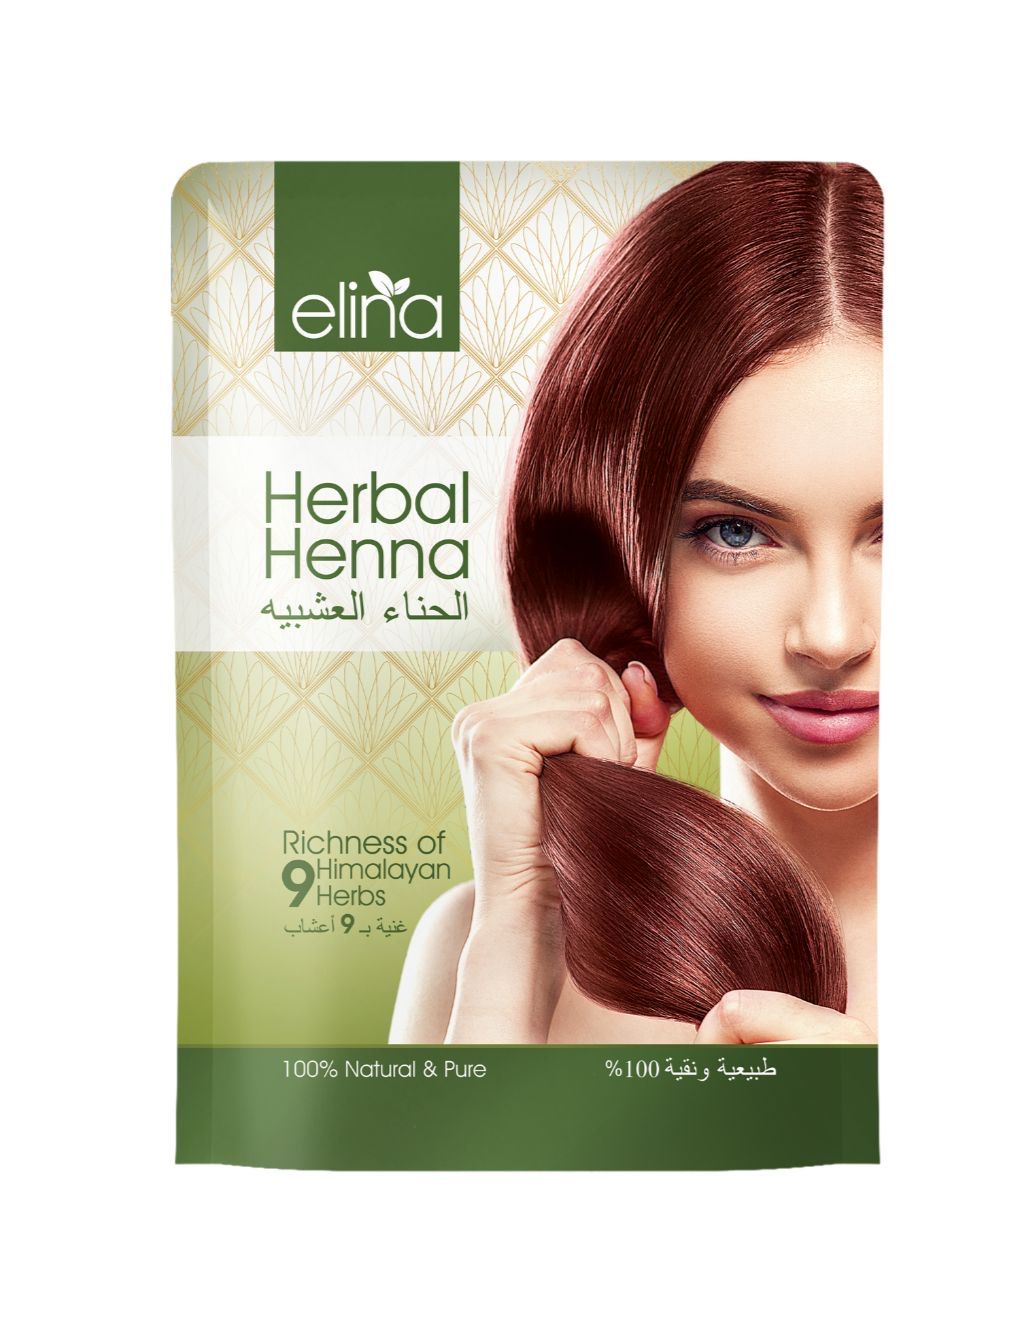 Everything You Need to Know Before You Dye Your Hair with Henna